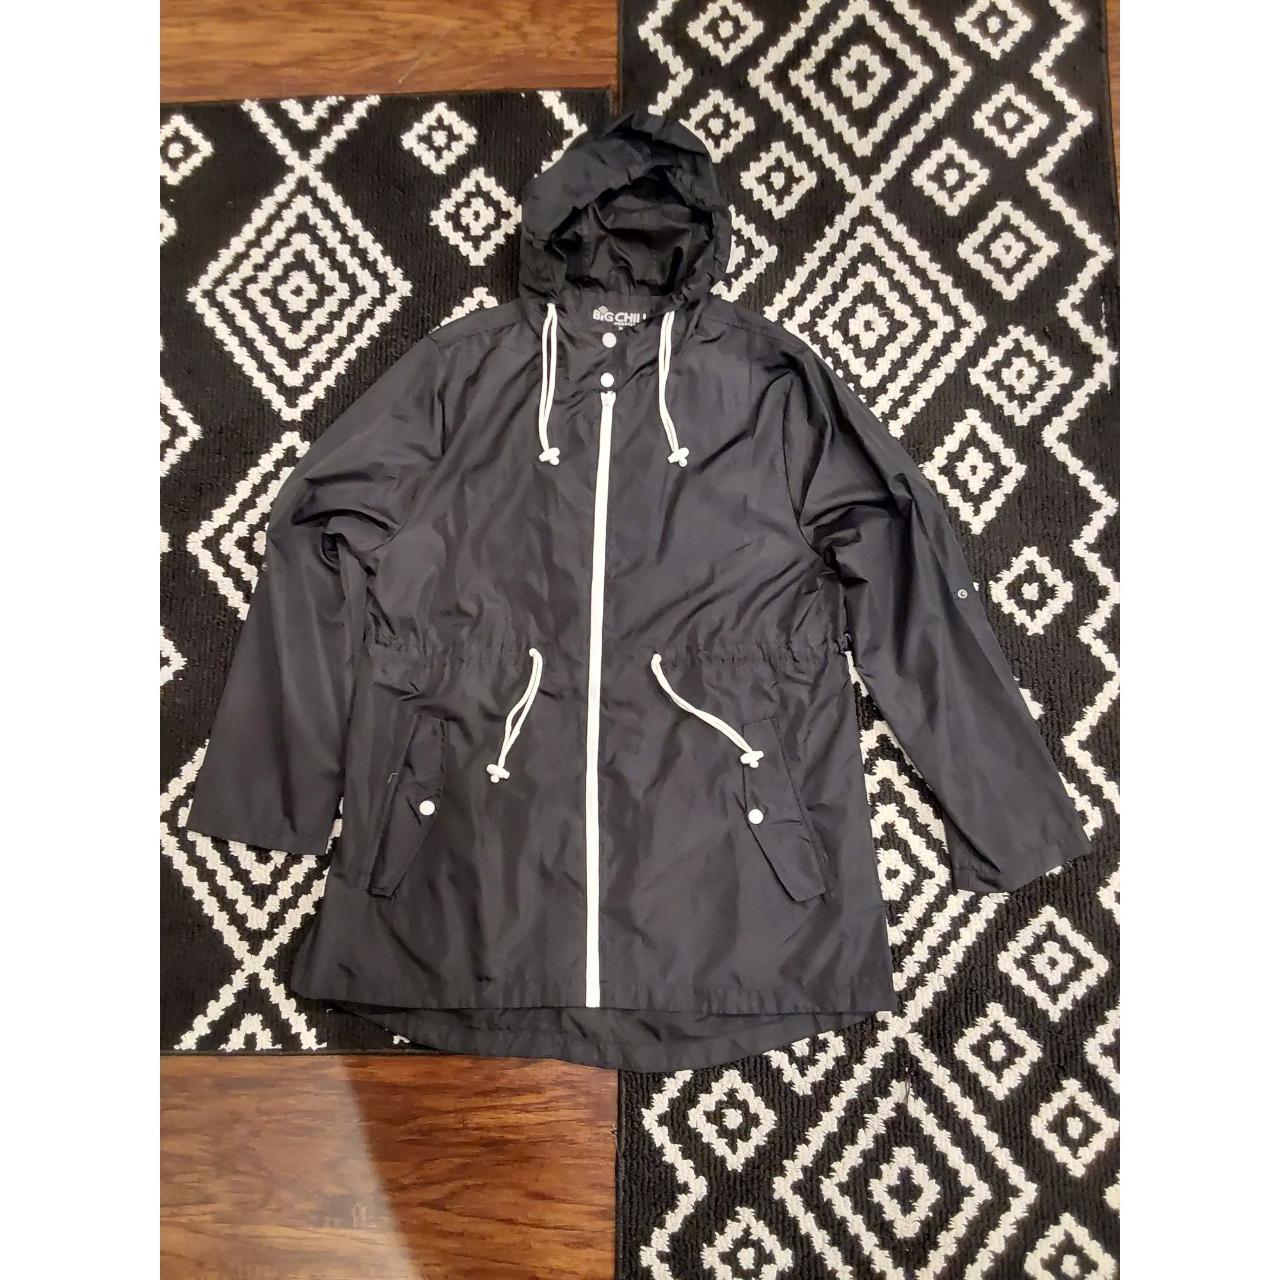 This Big Chill Freestyle Women's Rain Jacket in... - Depop